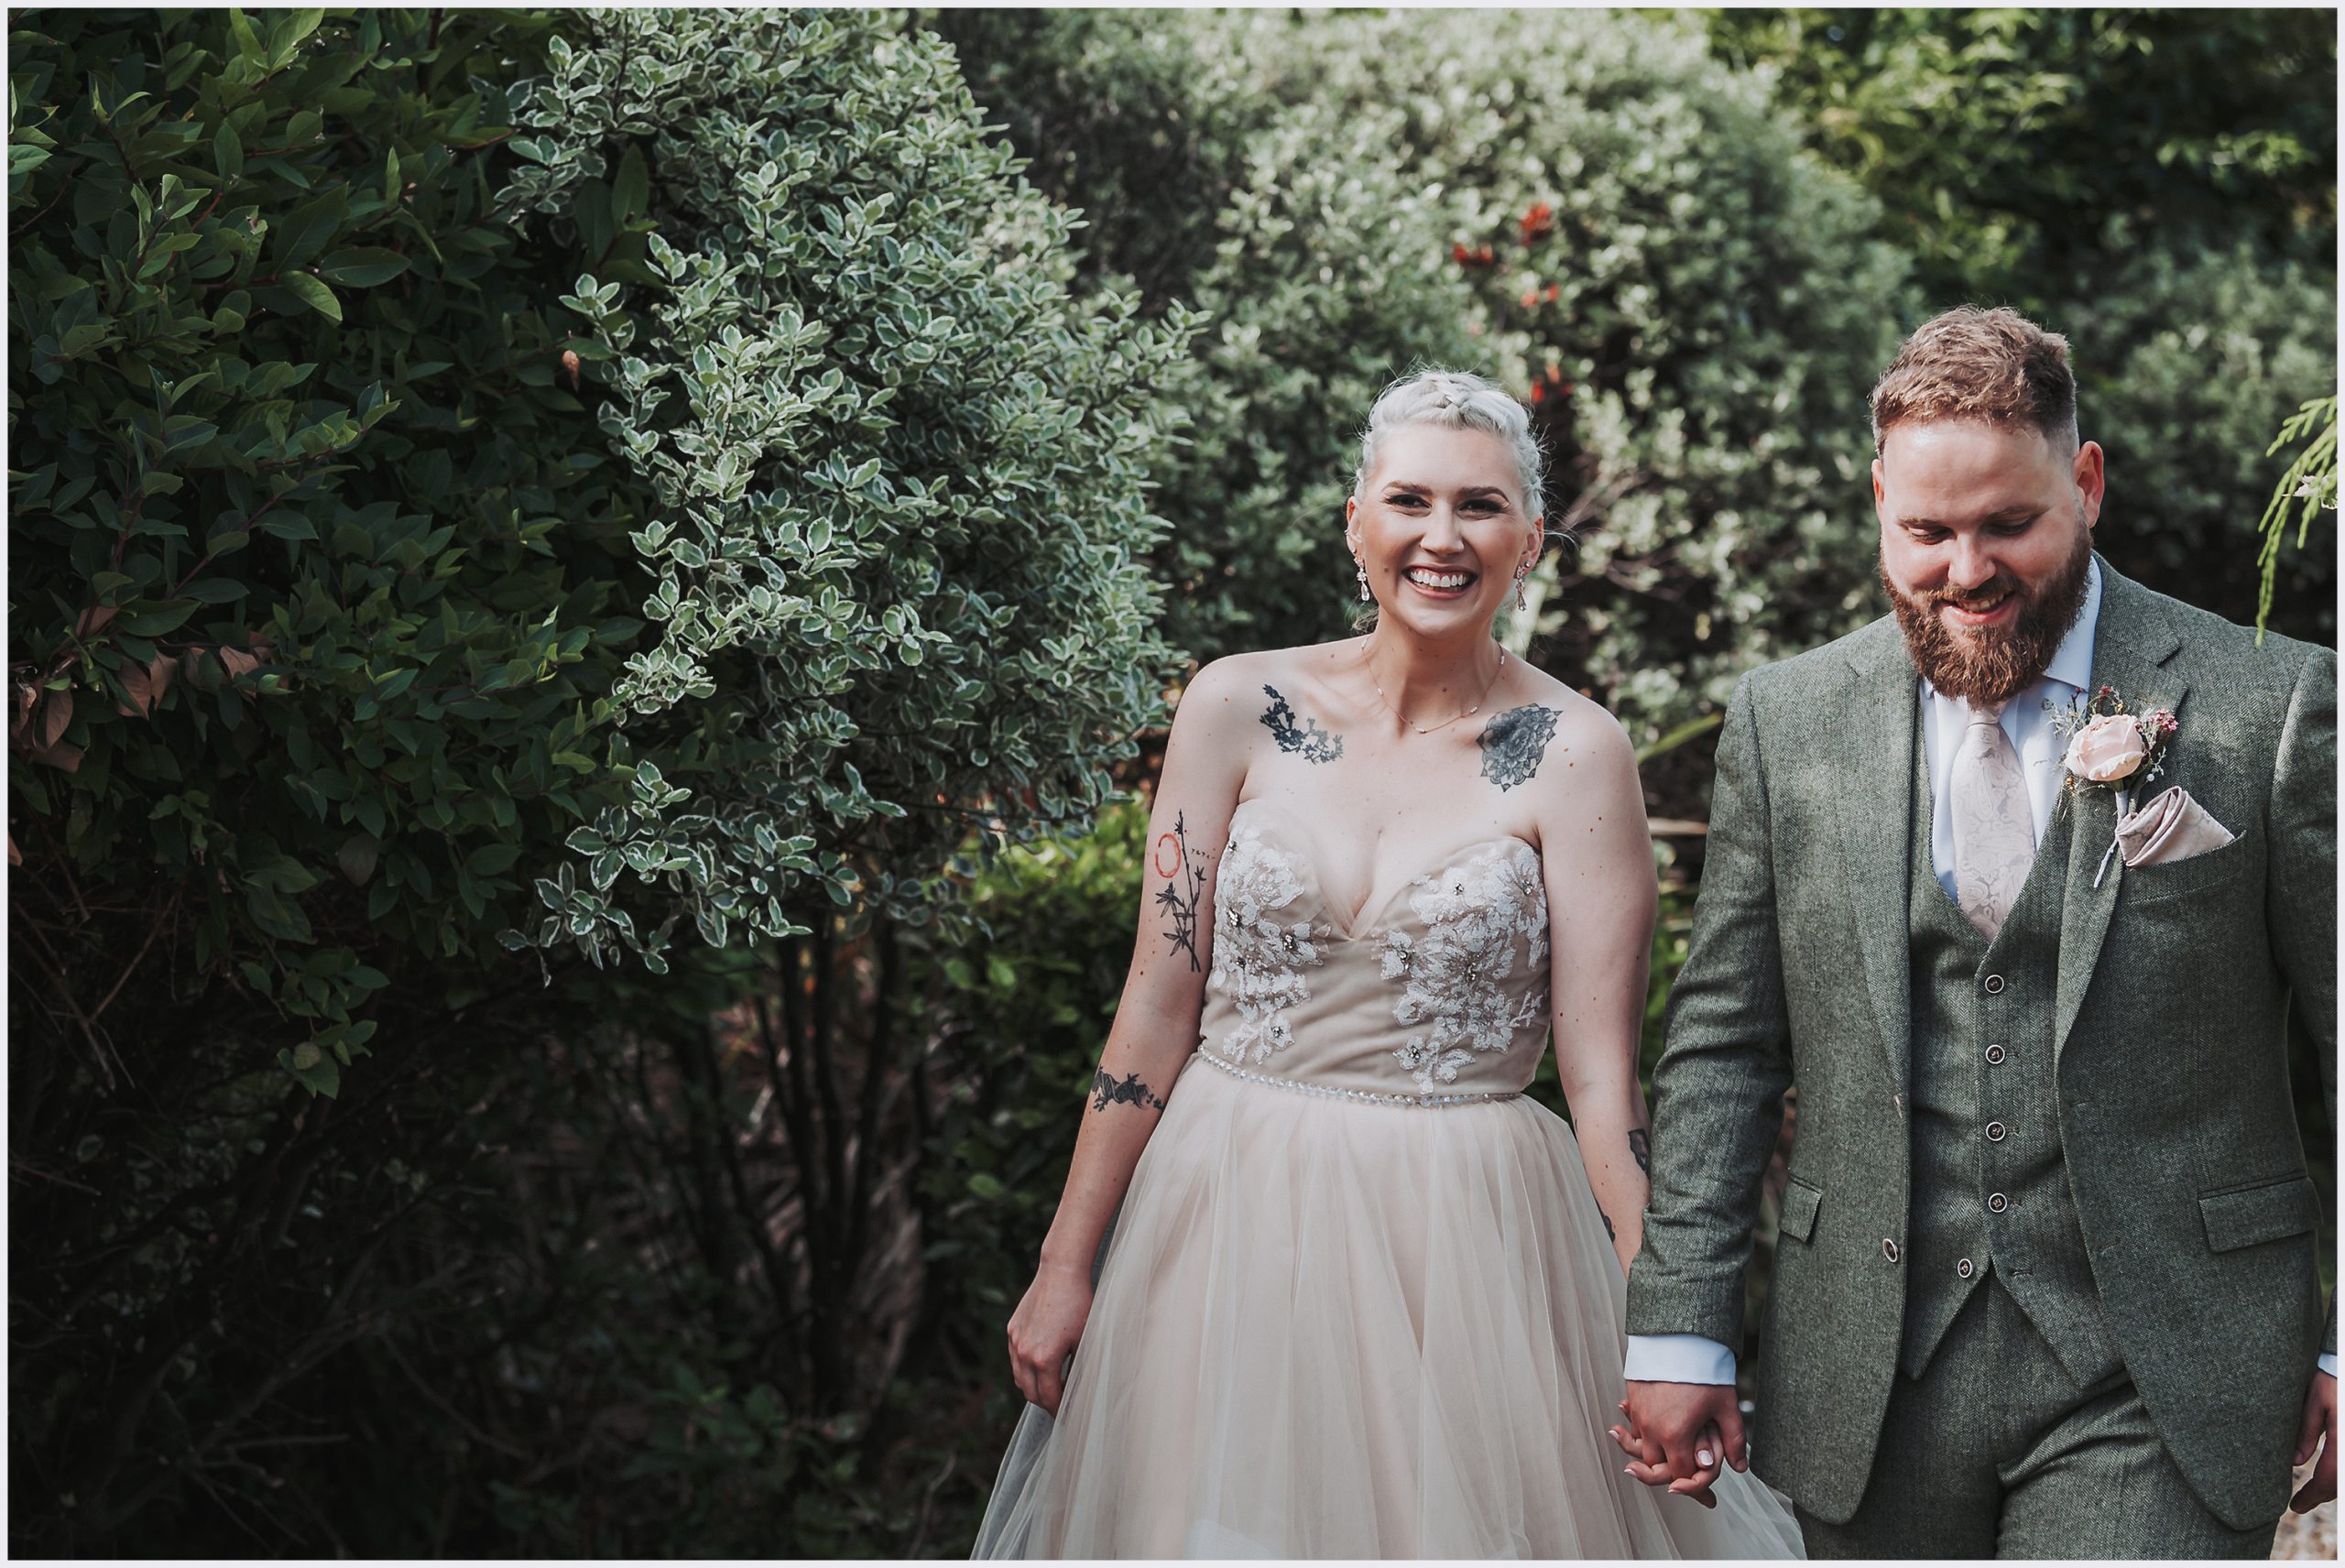 Cheshire's Fairytale Wedding: Bride and Groom in a Storybook Setting.  A bride smiles happily at the camera she walks hand in hand with her husband at The Grosvenor Pulford Hotel and Spa